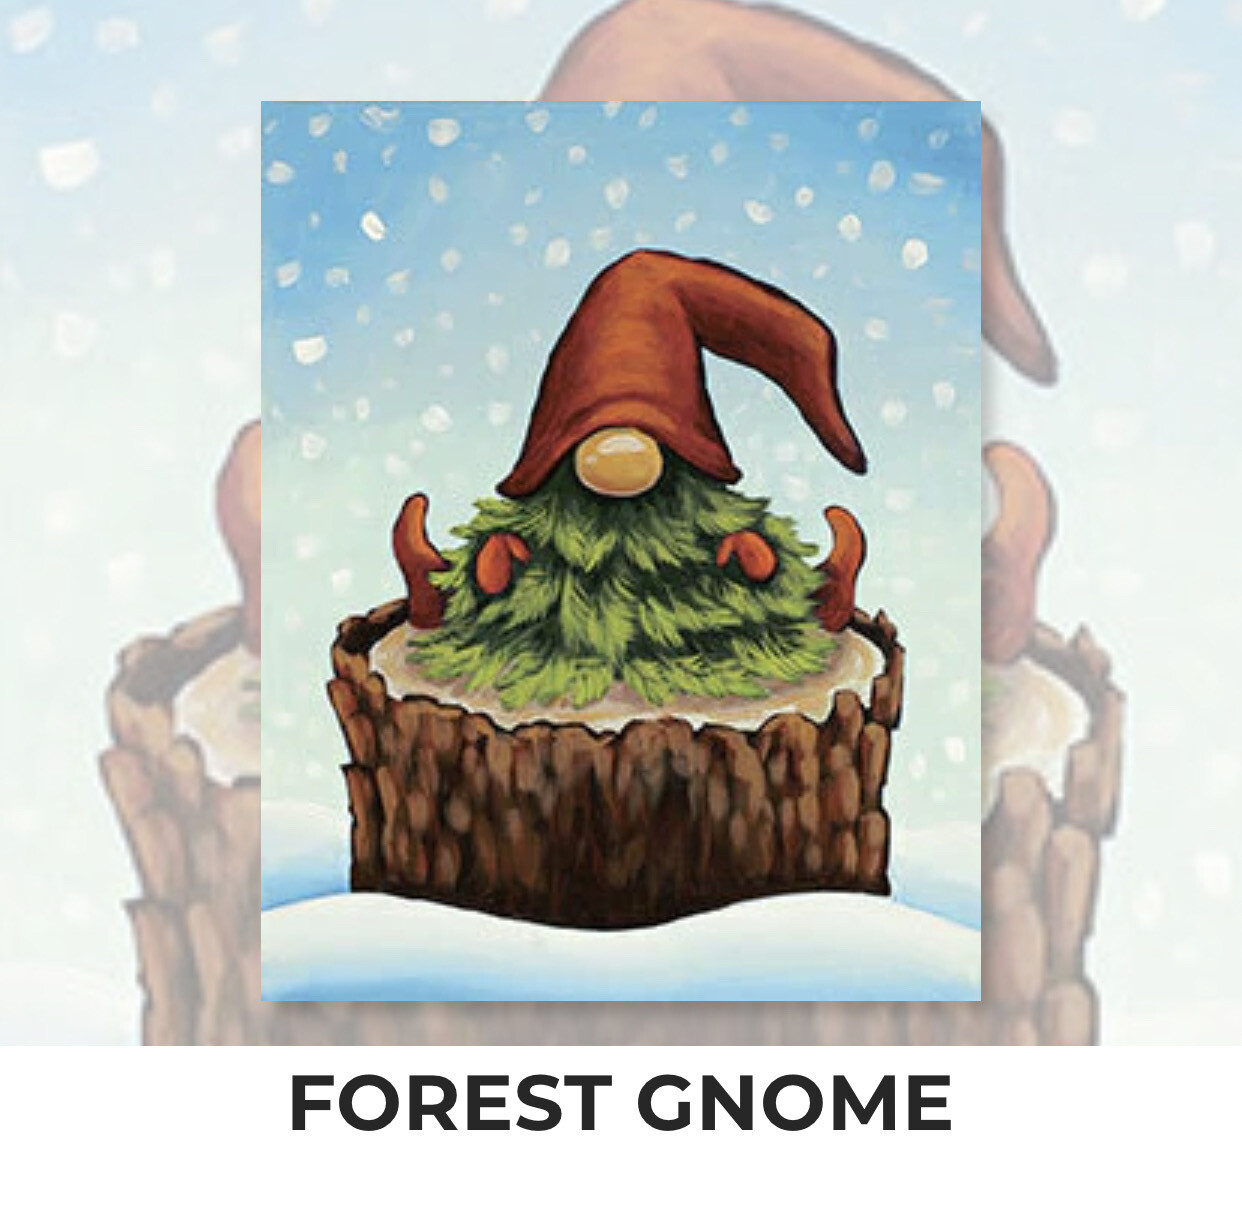 Forest Gnome ADULT Acrylic Paint On Canvas DIY Art Kit - 3 Week Special Order